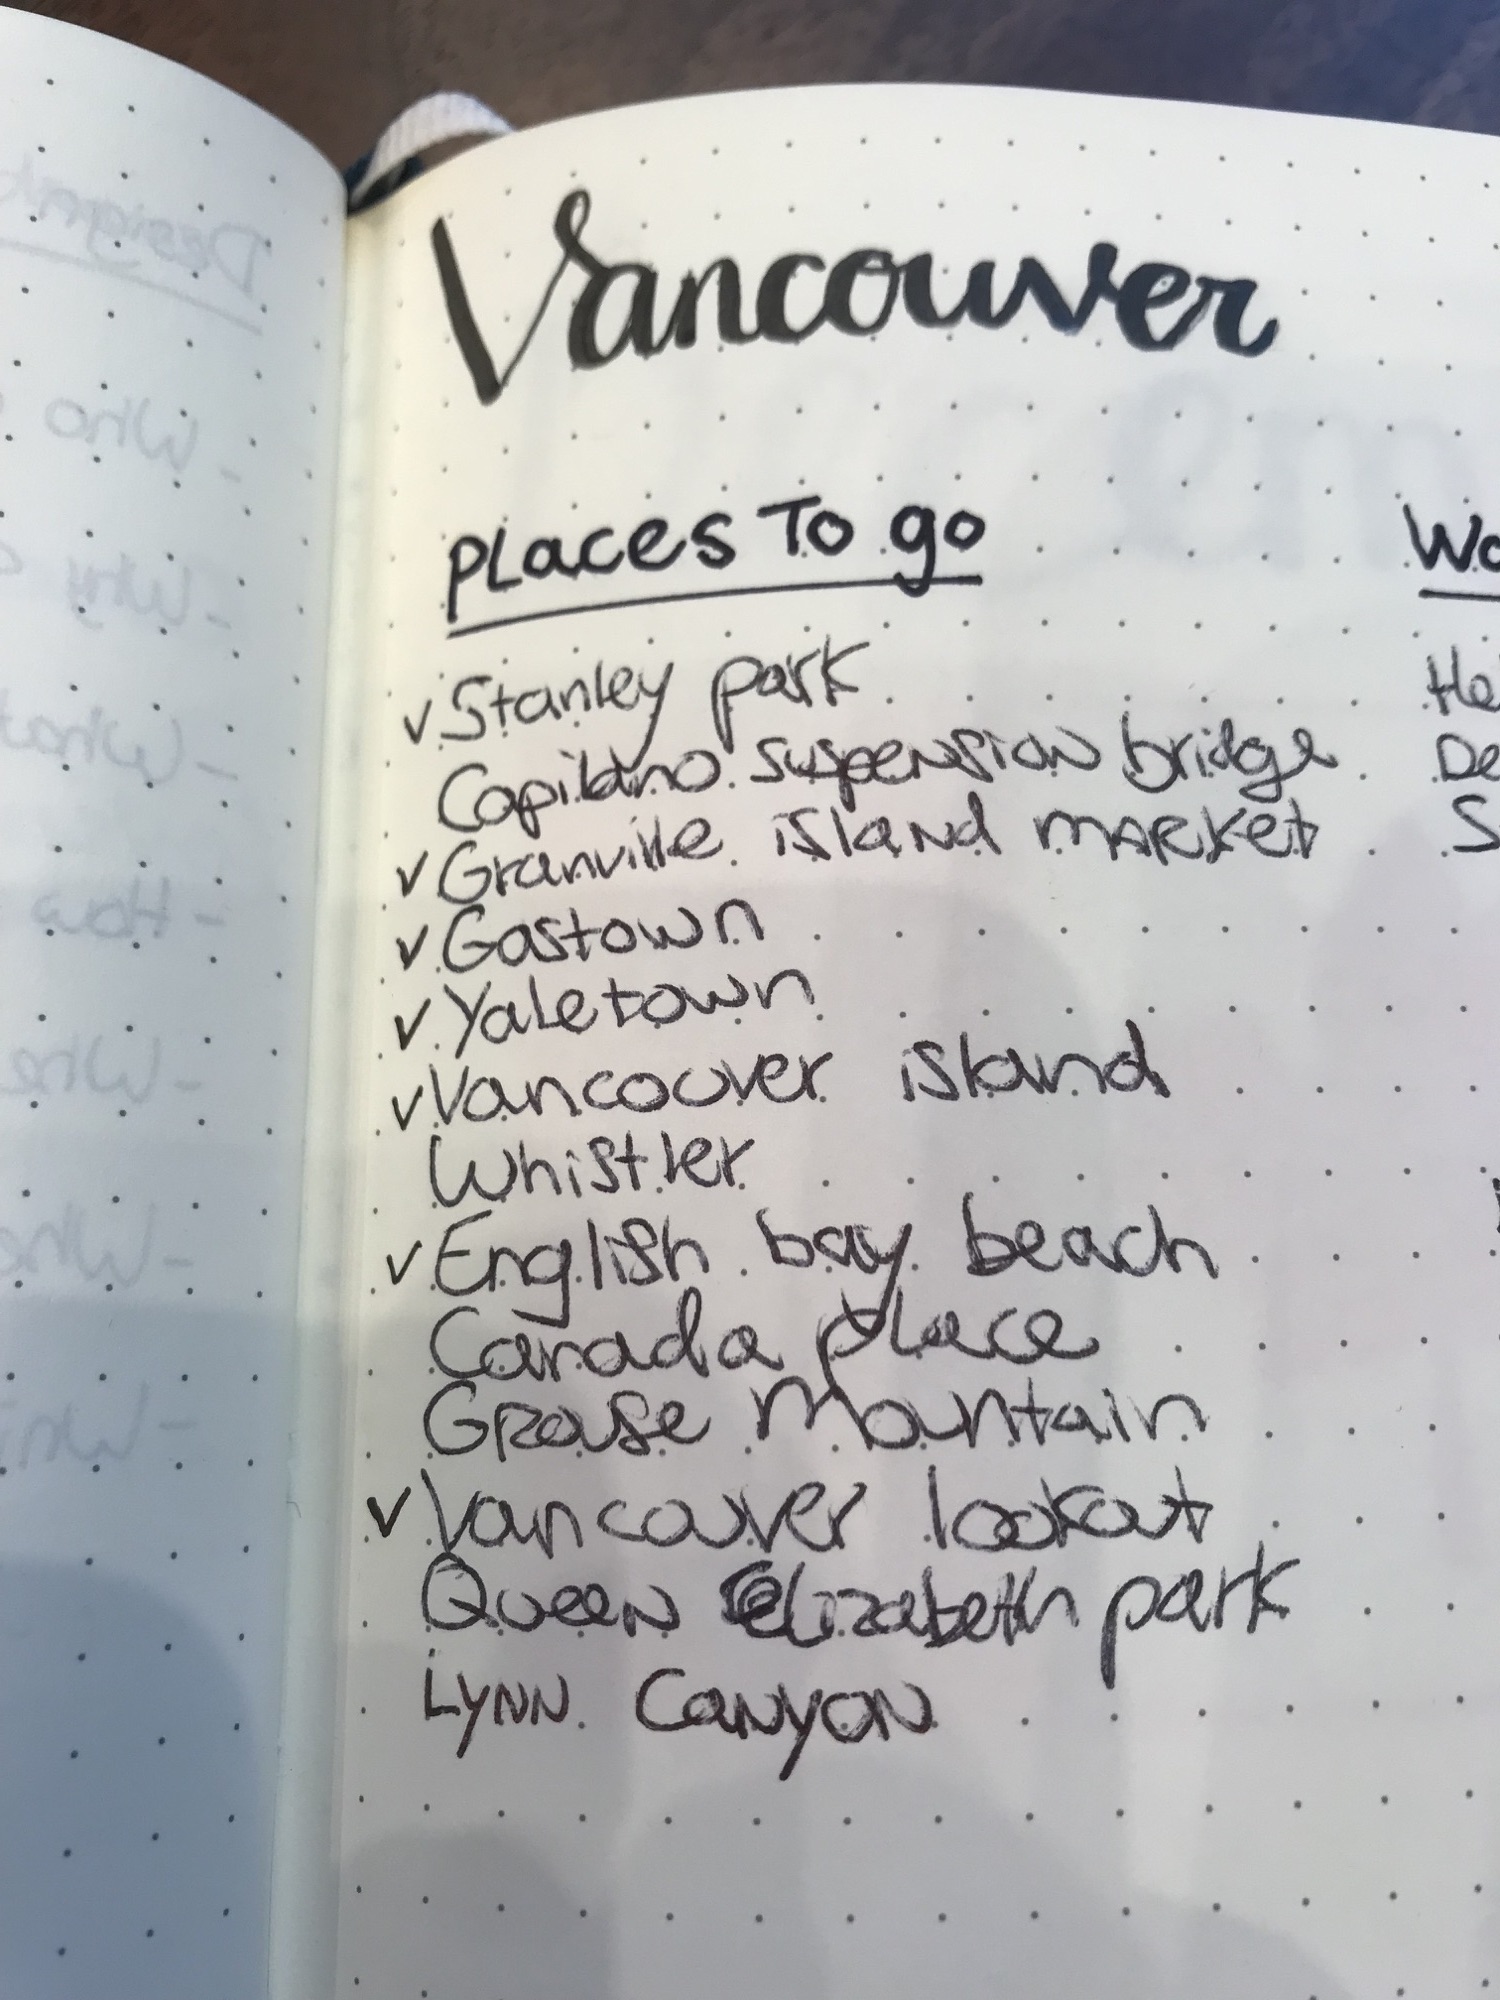 Checking my Vancouver bucket list